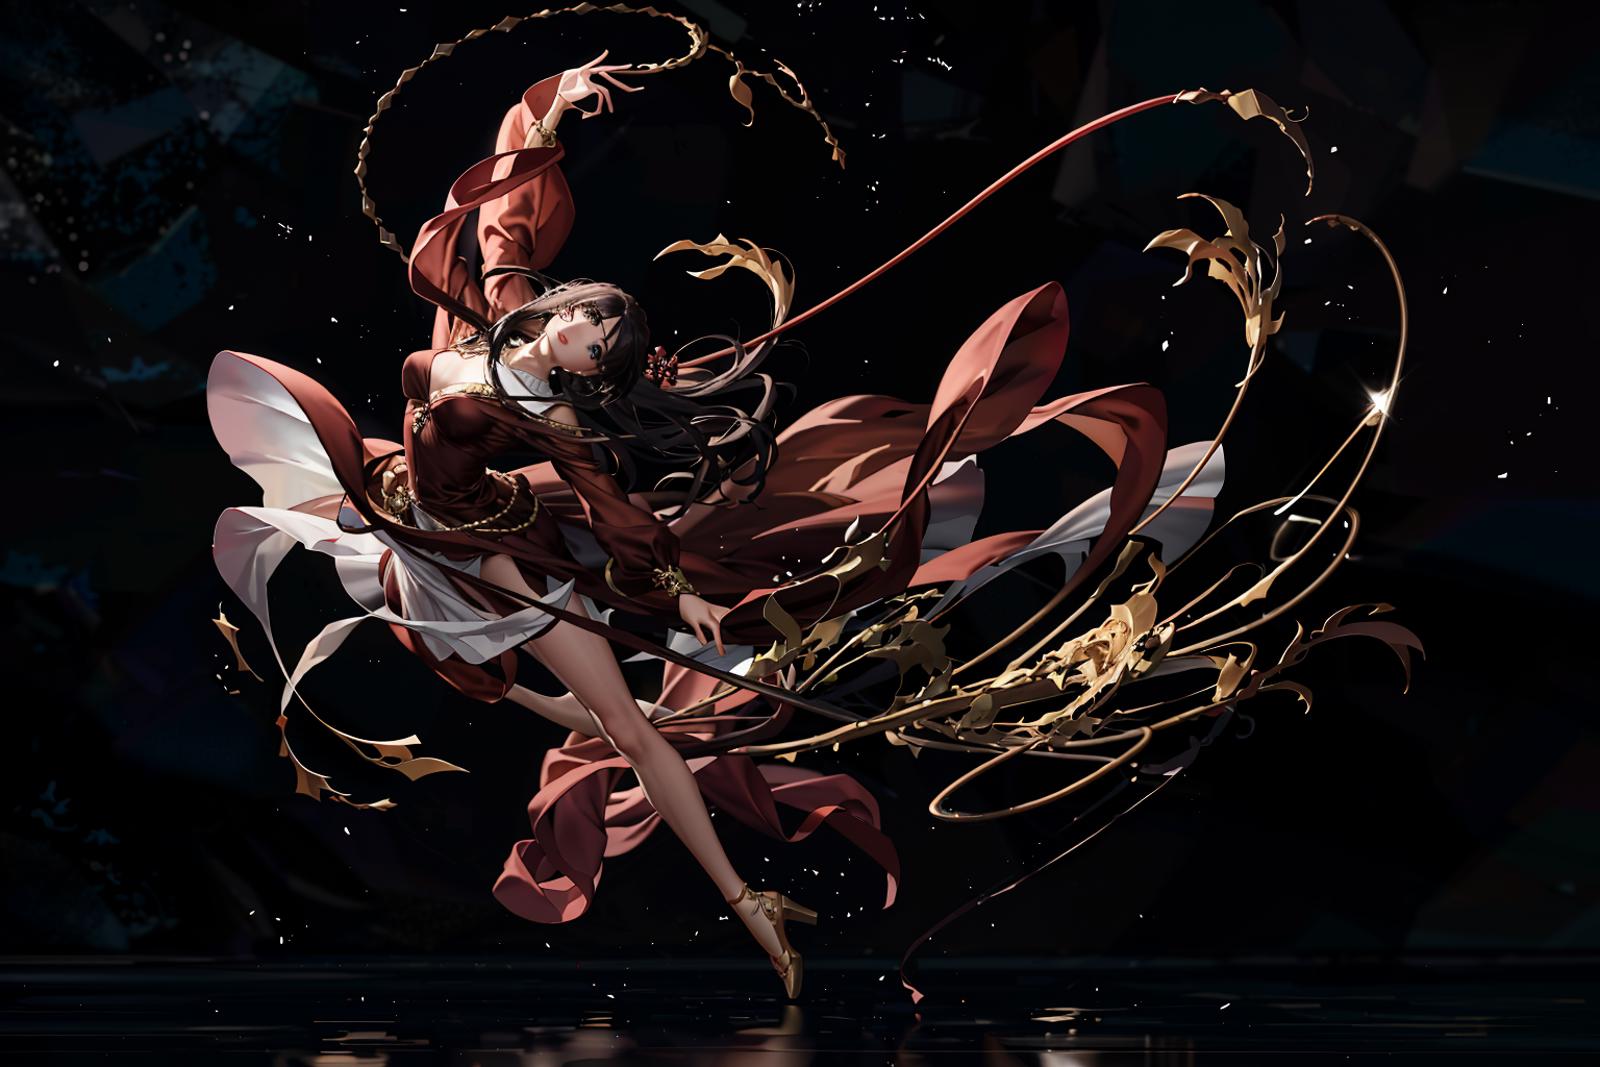 7dragons The ethereal dancer | 飘逸的舞者 image by 7dragons